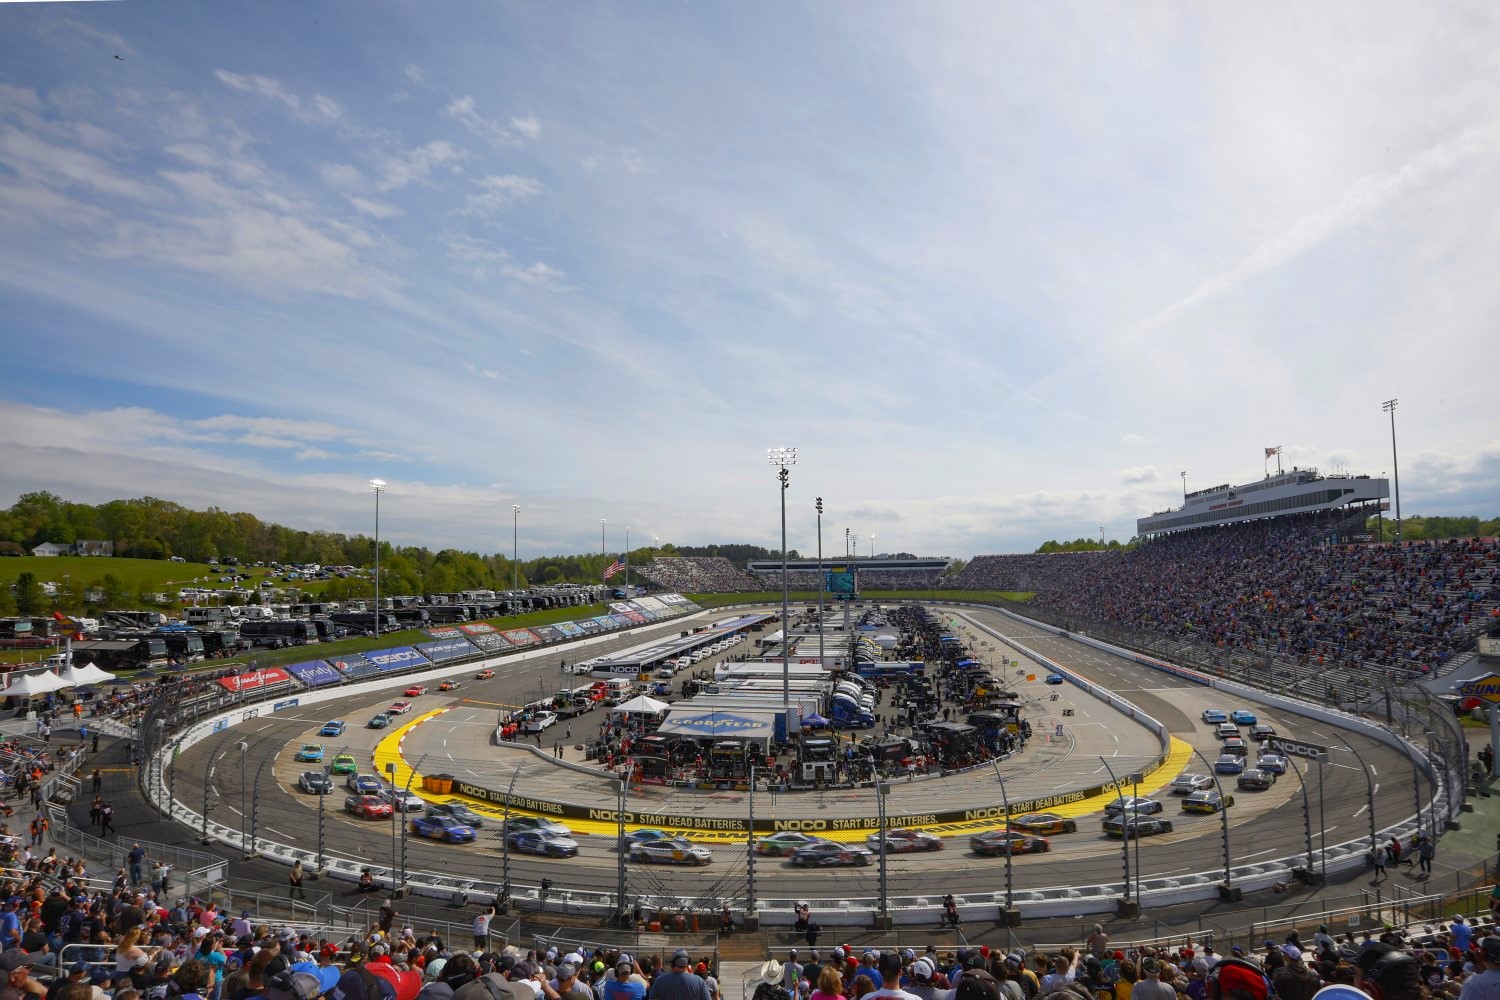 A general view of racing during the NASCAR Cup Series NOCO 400 at Martinsville Speedway on April 16, 2023 in Martinsville, Virginia. (Photo by Sean Gardner/Getty Images)